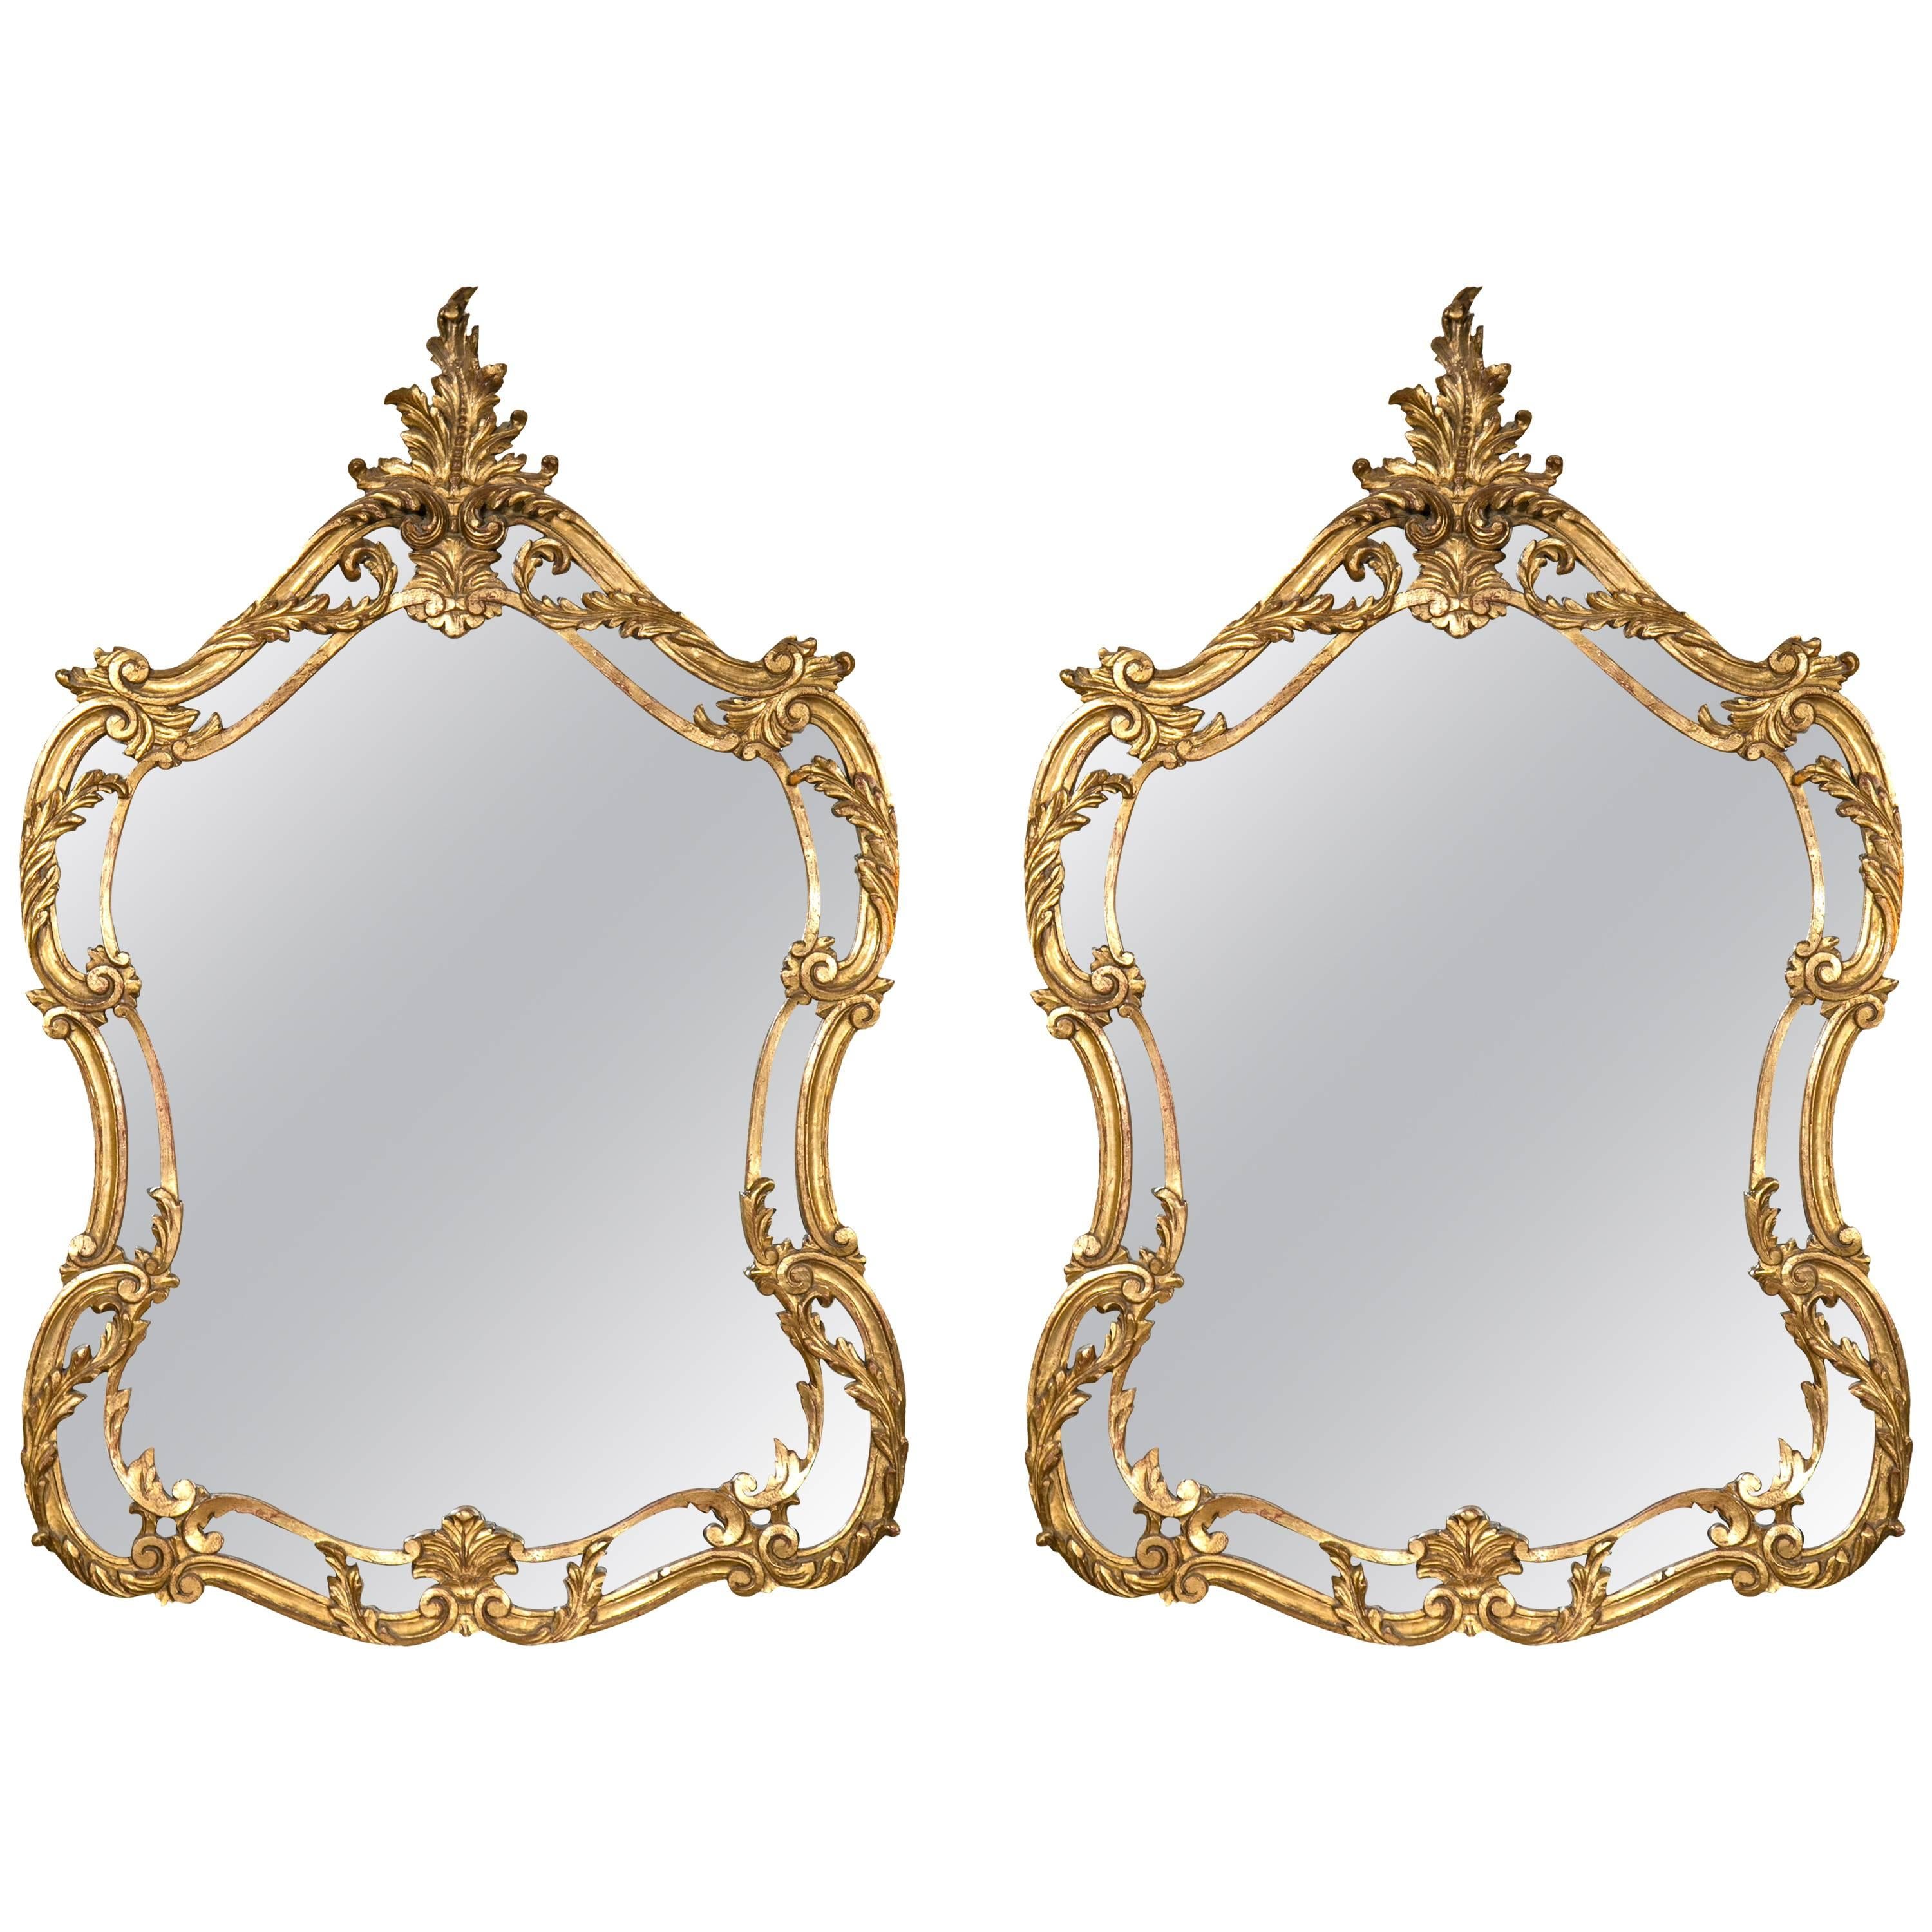 Pair of Italian Leaf and Scroll Giltwood Mirrors Louis XV Style Finely Carved